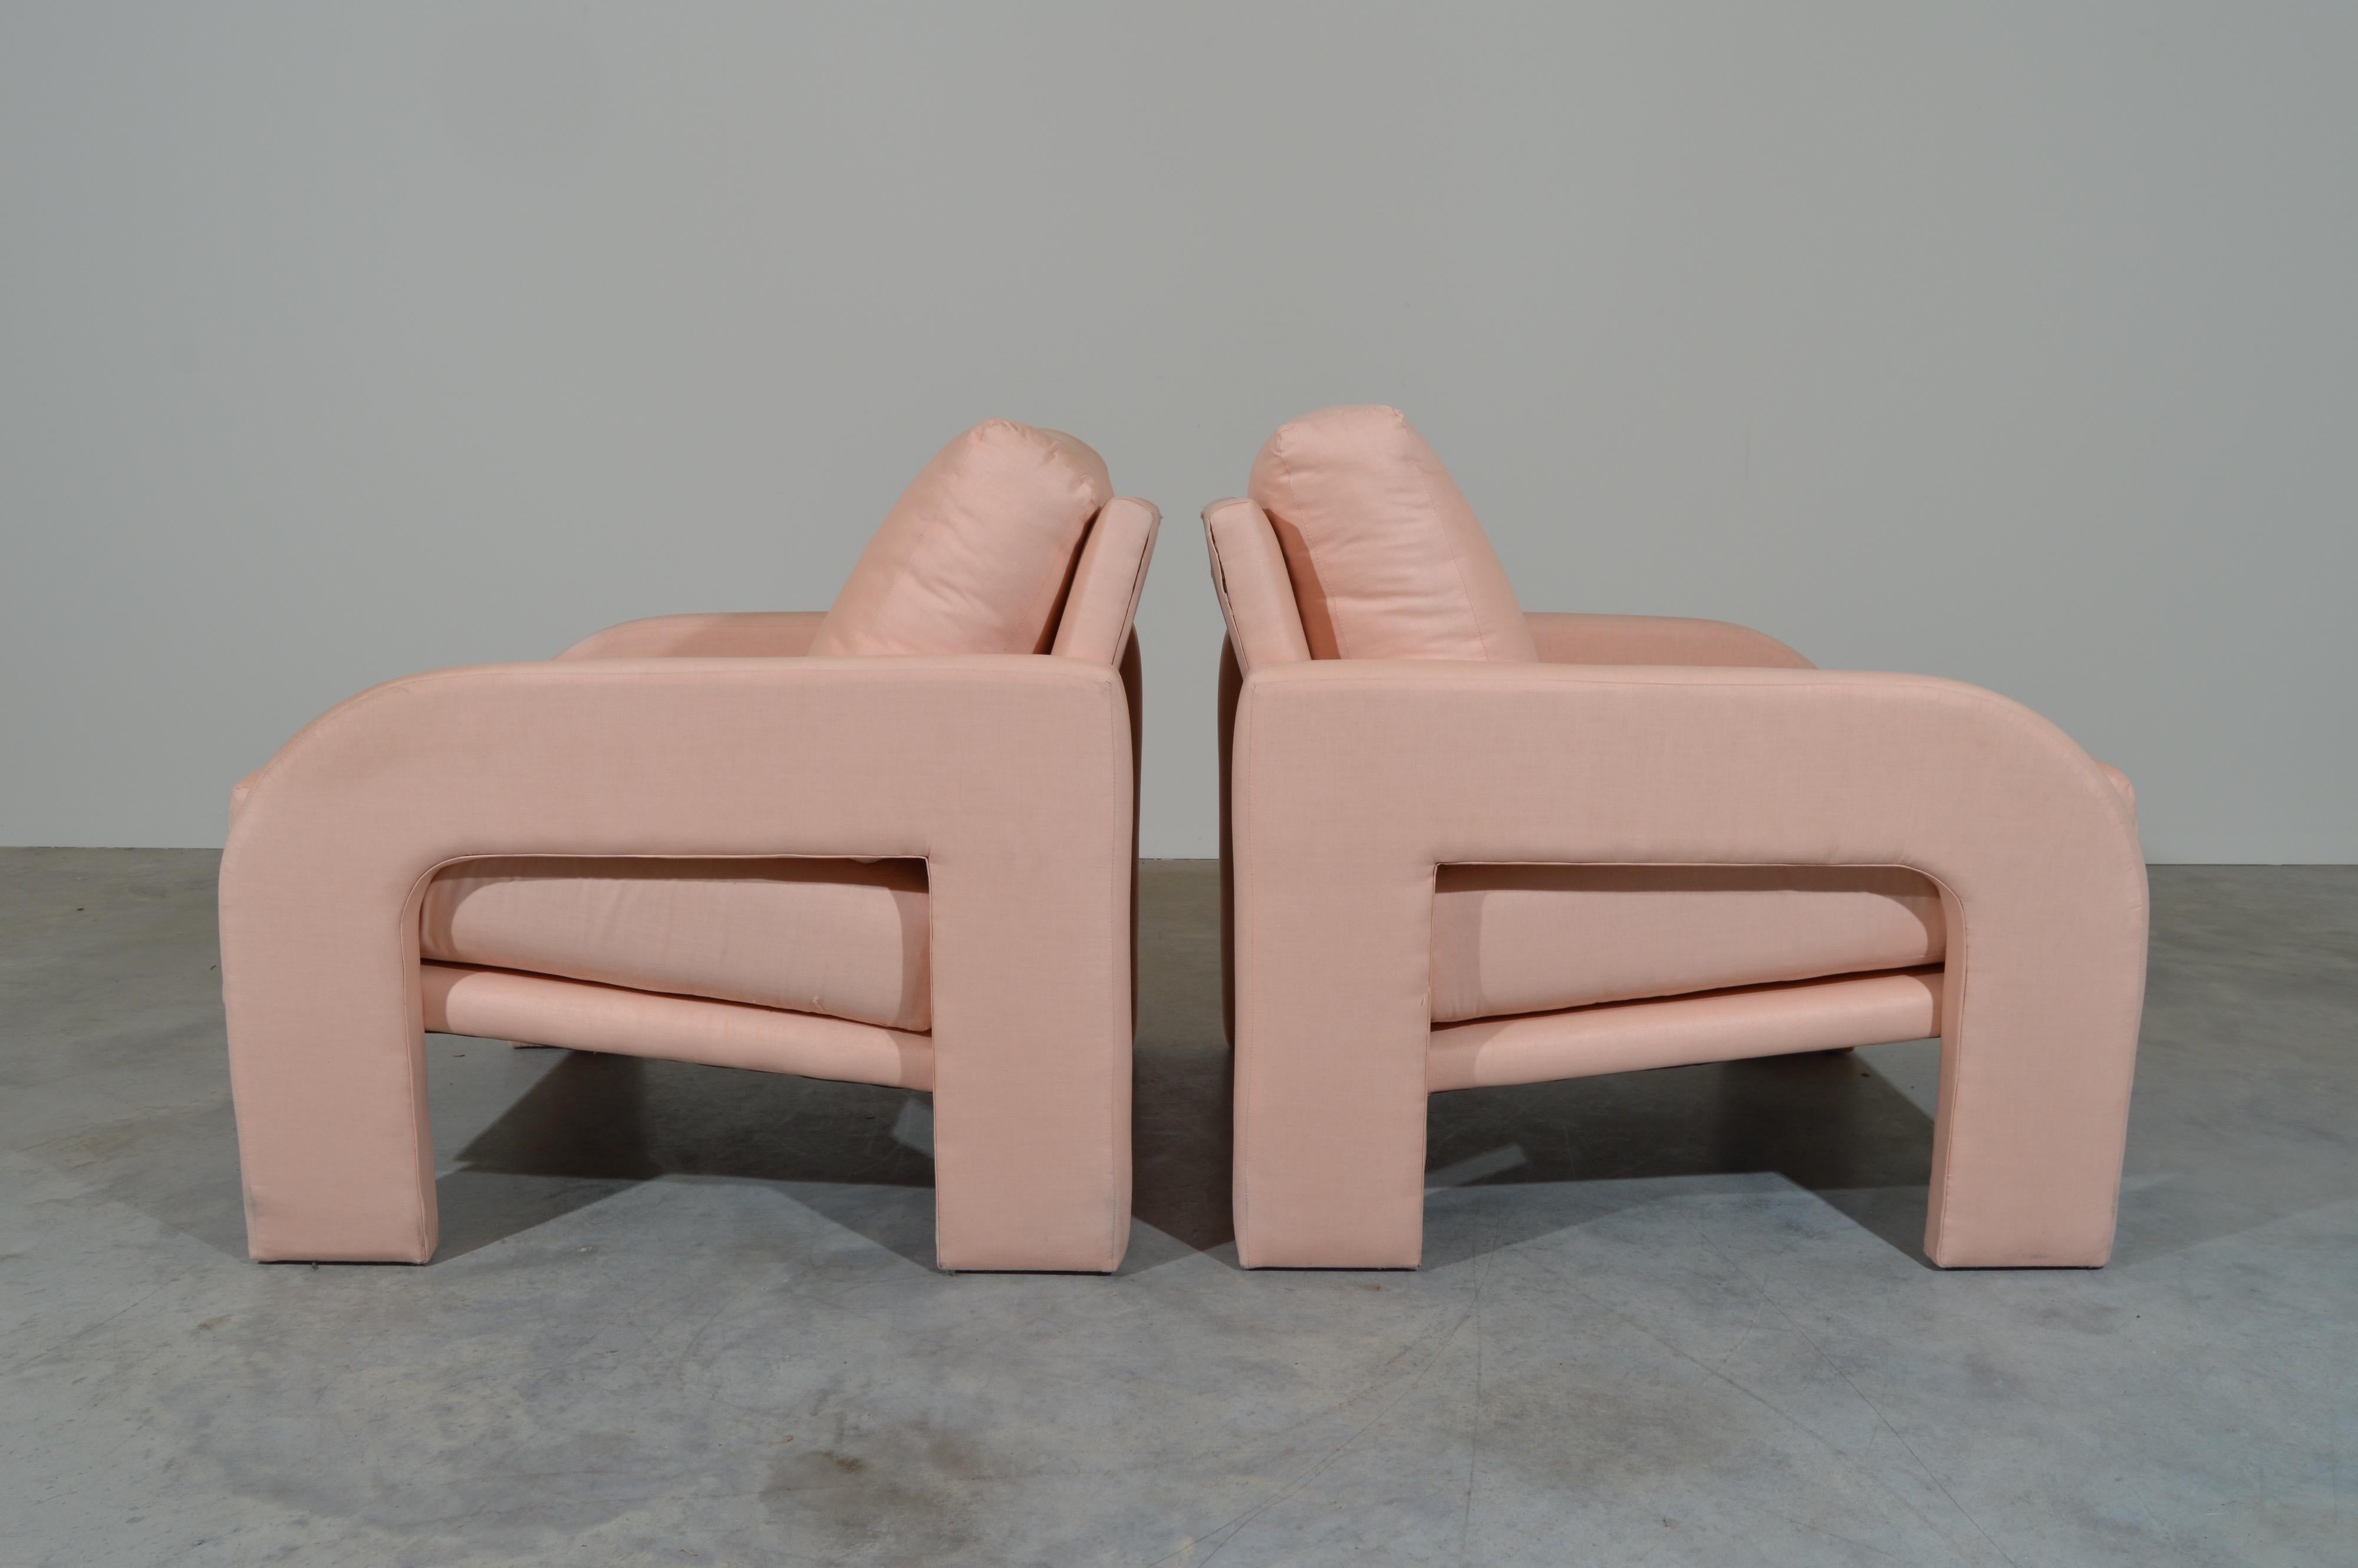 Hollywood Regency Adrian Pearsall Lounge Chairs For Comfort Designs, circa 1970